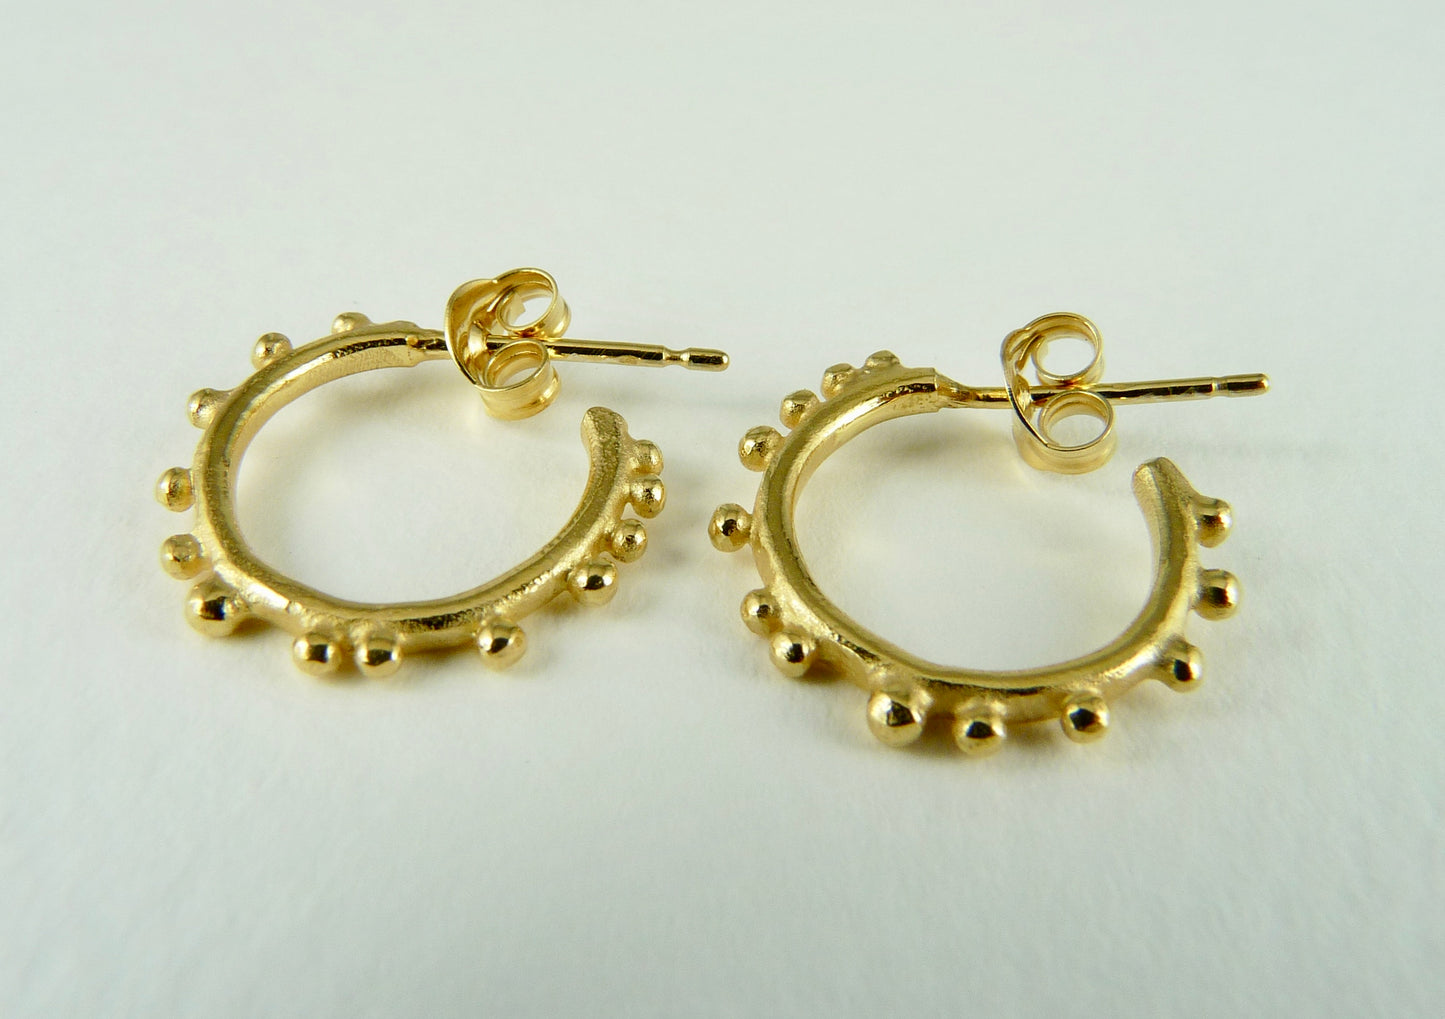 Tiny Granulation Gypsy Hoops in 18ct gold plate As seen in Style Magazine